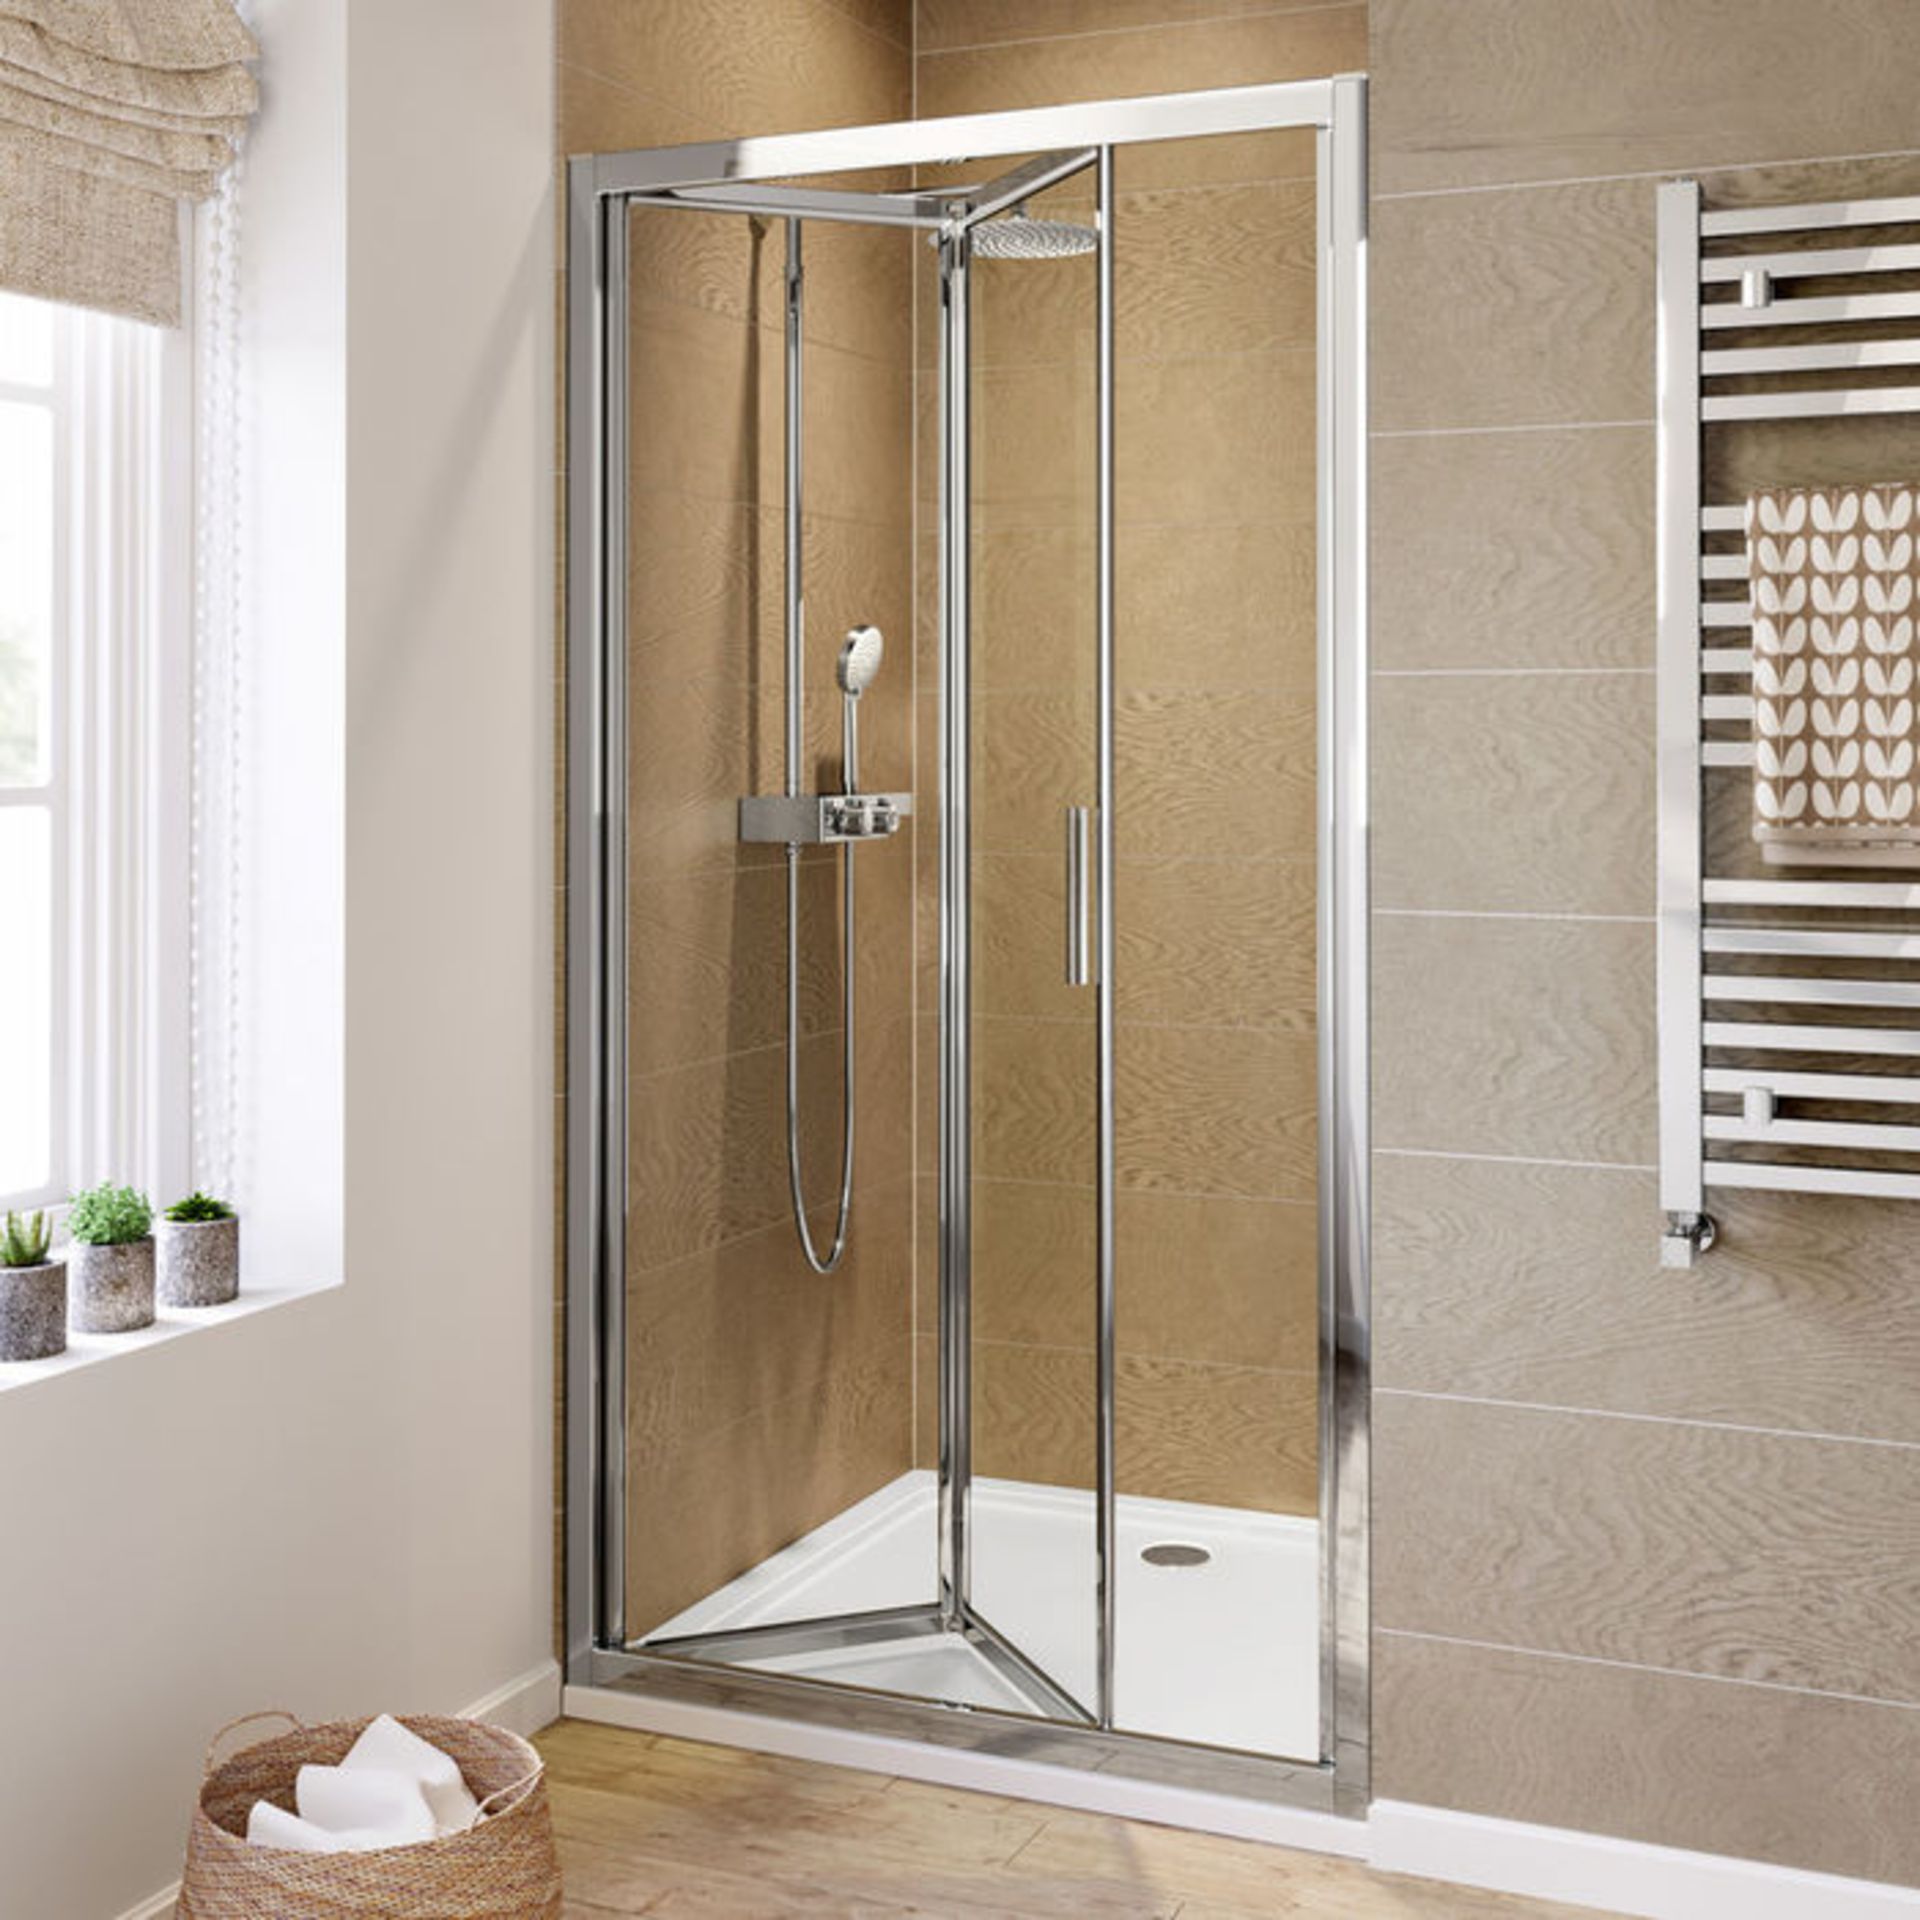 (ZA215) 1000mm - 6mm - Elements EasyClean Bifold Shower Door. RRP £239.99. 6mm Safety Glass - - Image 2 of 3